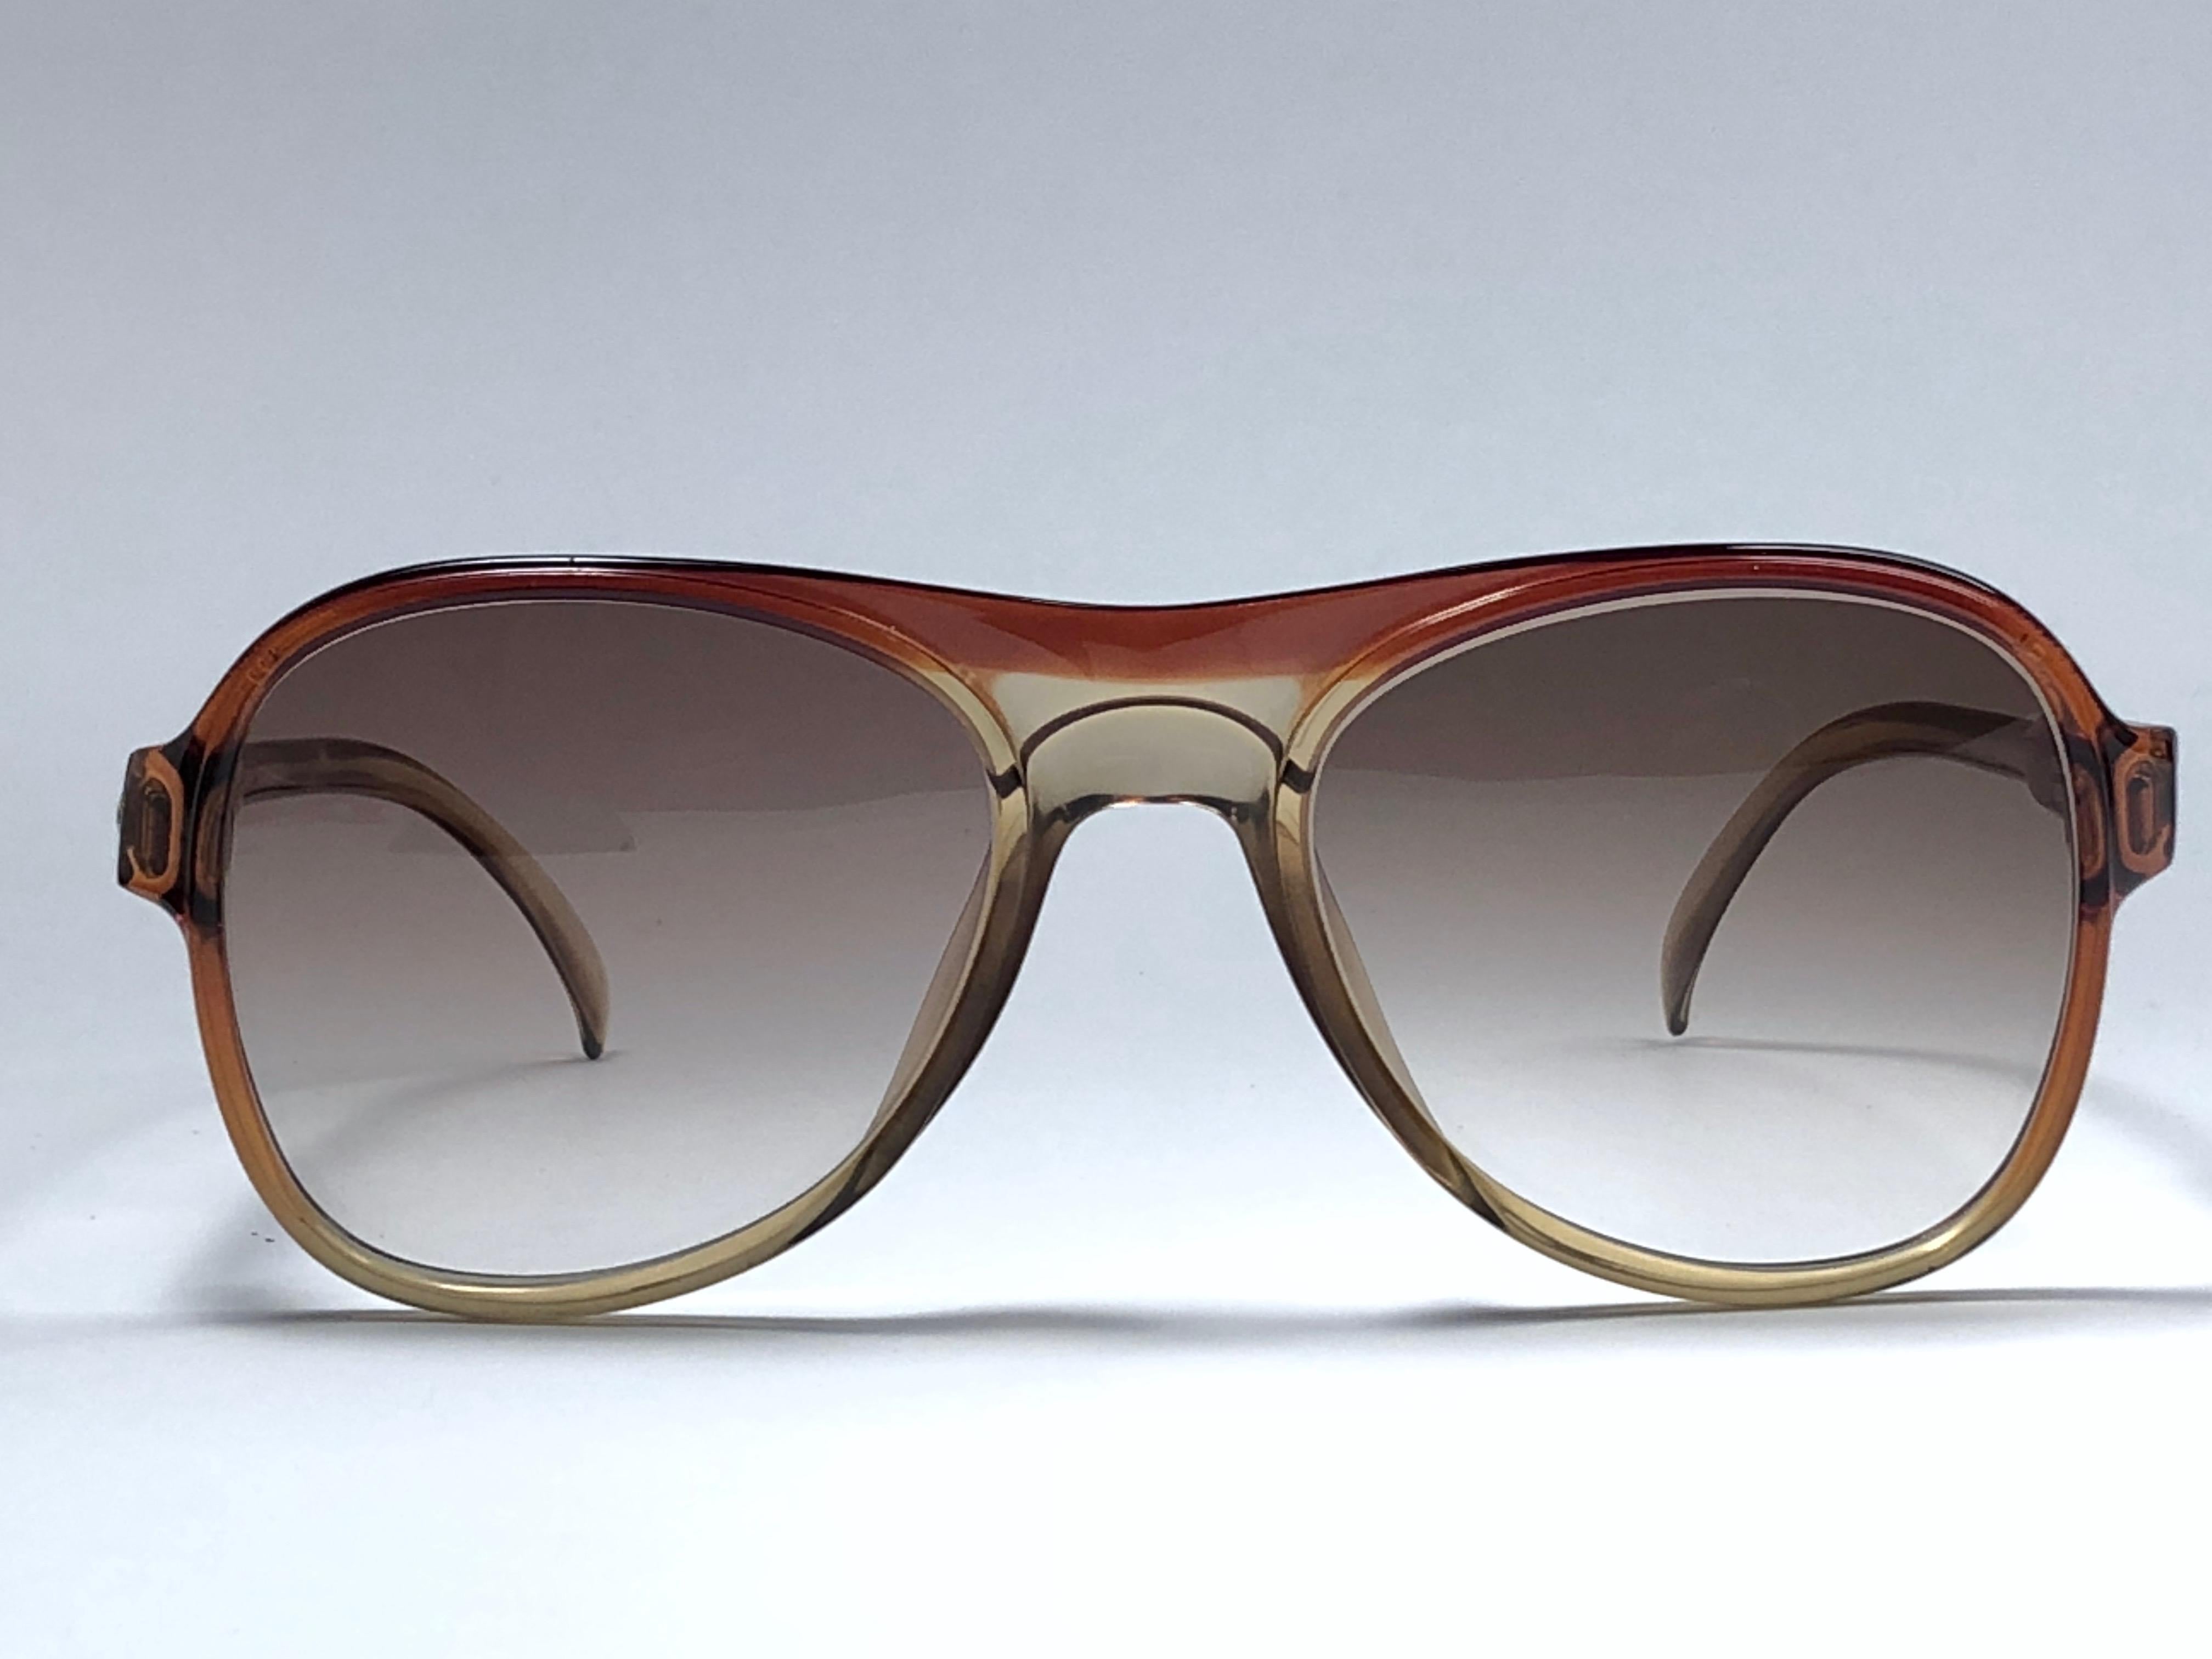 New vintage Christian Dior Monsieur amber translucent details frame.

Spotless brown gradient lenses.

Comes with it original CD Monsieur sleeve.

New, never worn or displayed this item may show light sign of wear due to storage.

Made in Austria